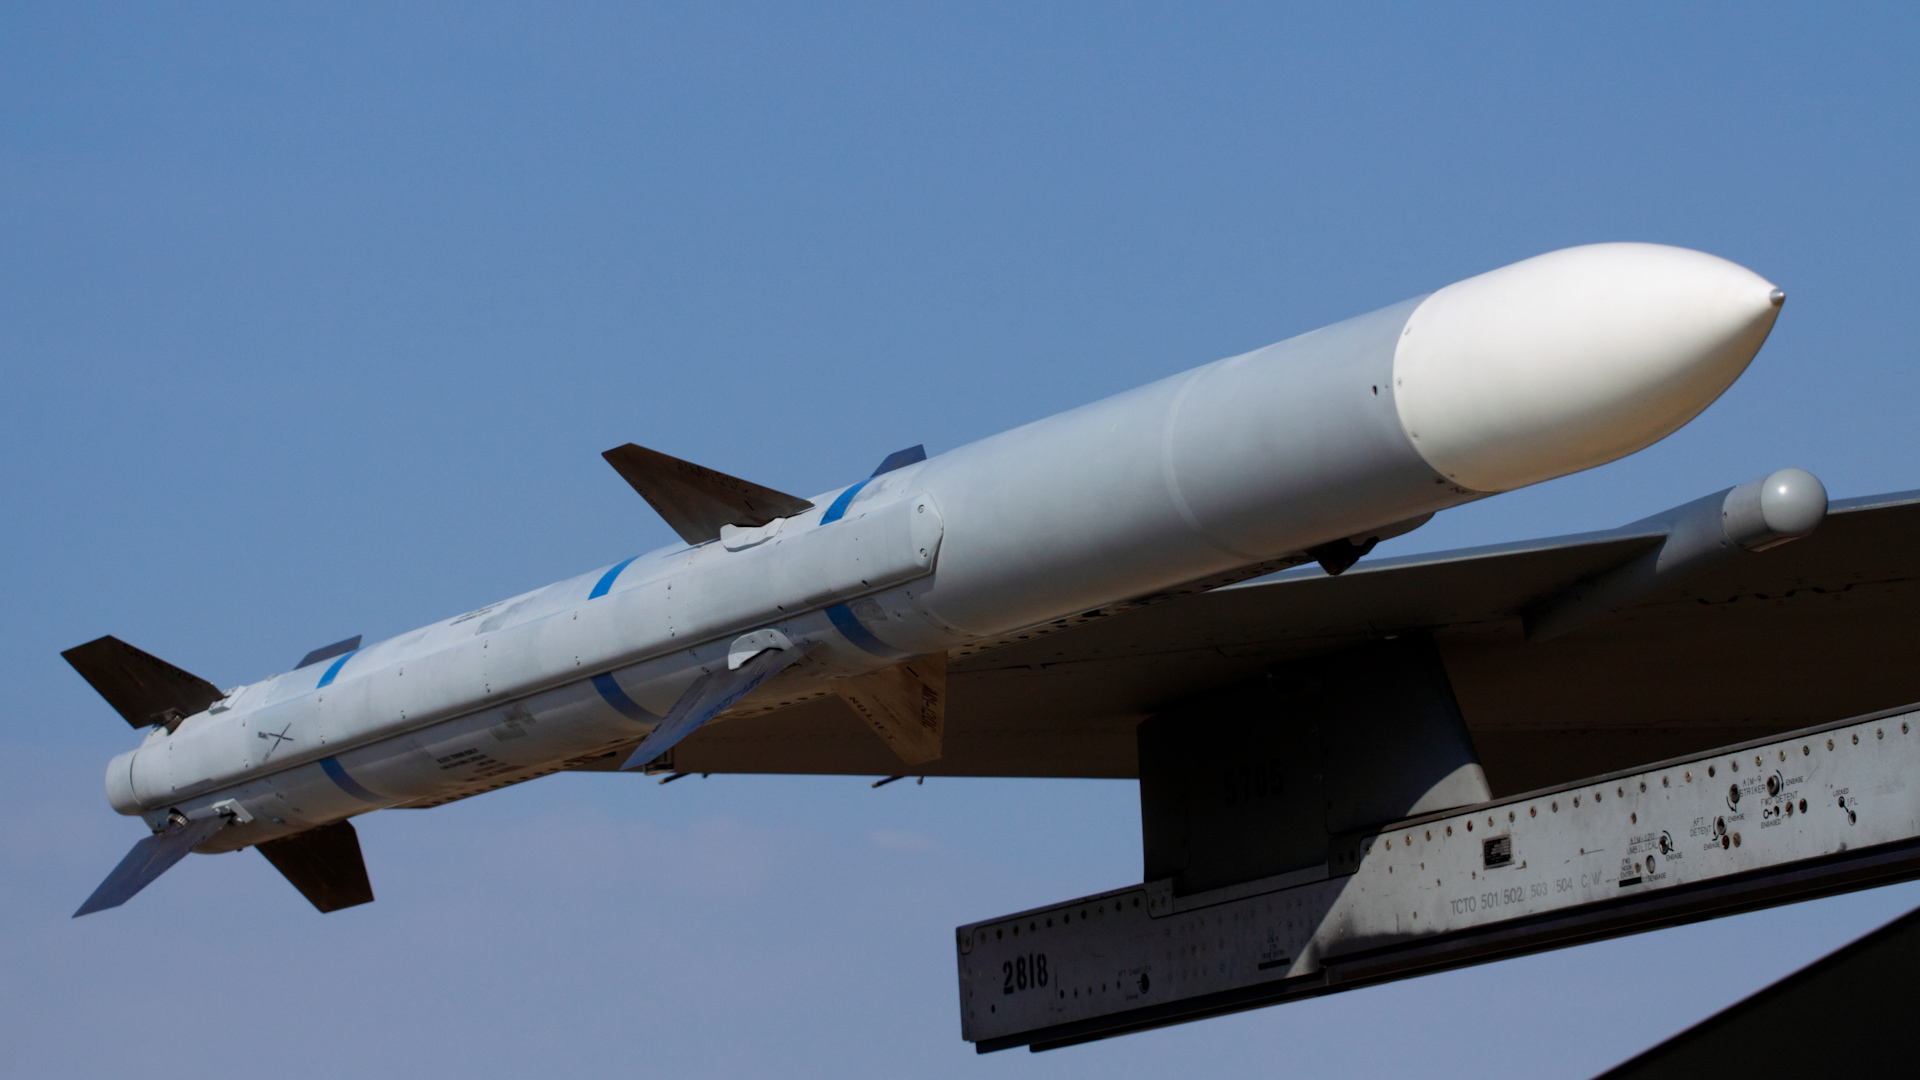 Sweden is going to sell Rb 99 (aka AMRAAM) air-to-air missiles to the US, and the latter will give them to Ukraine